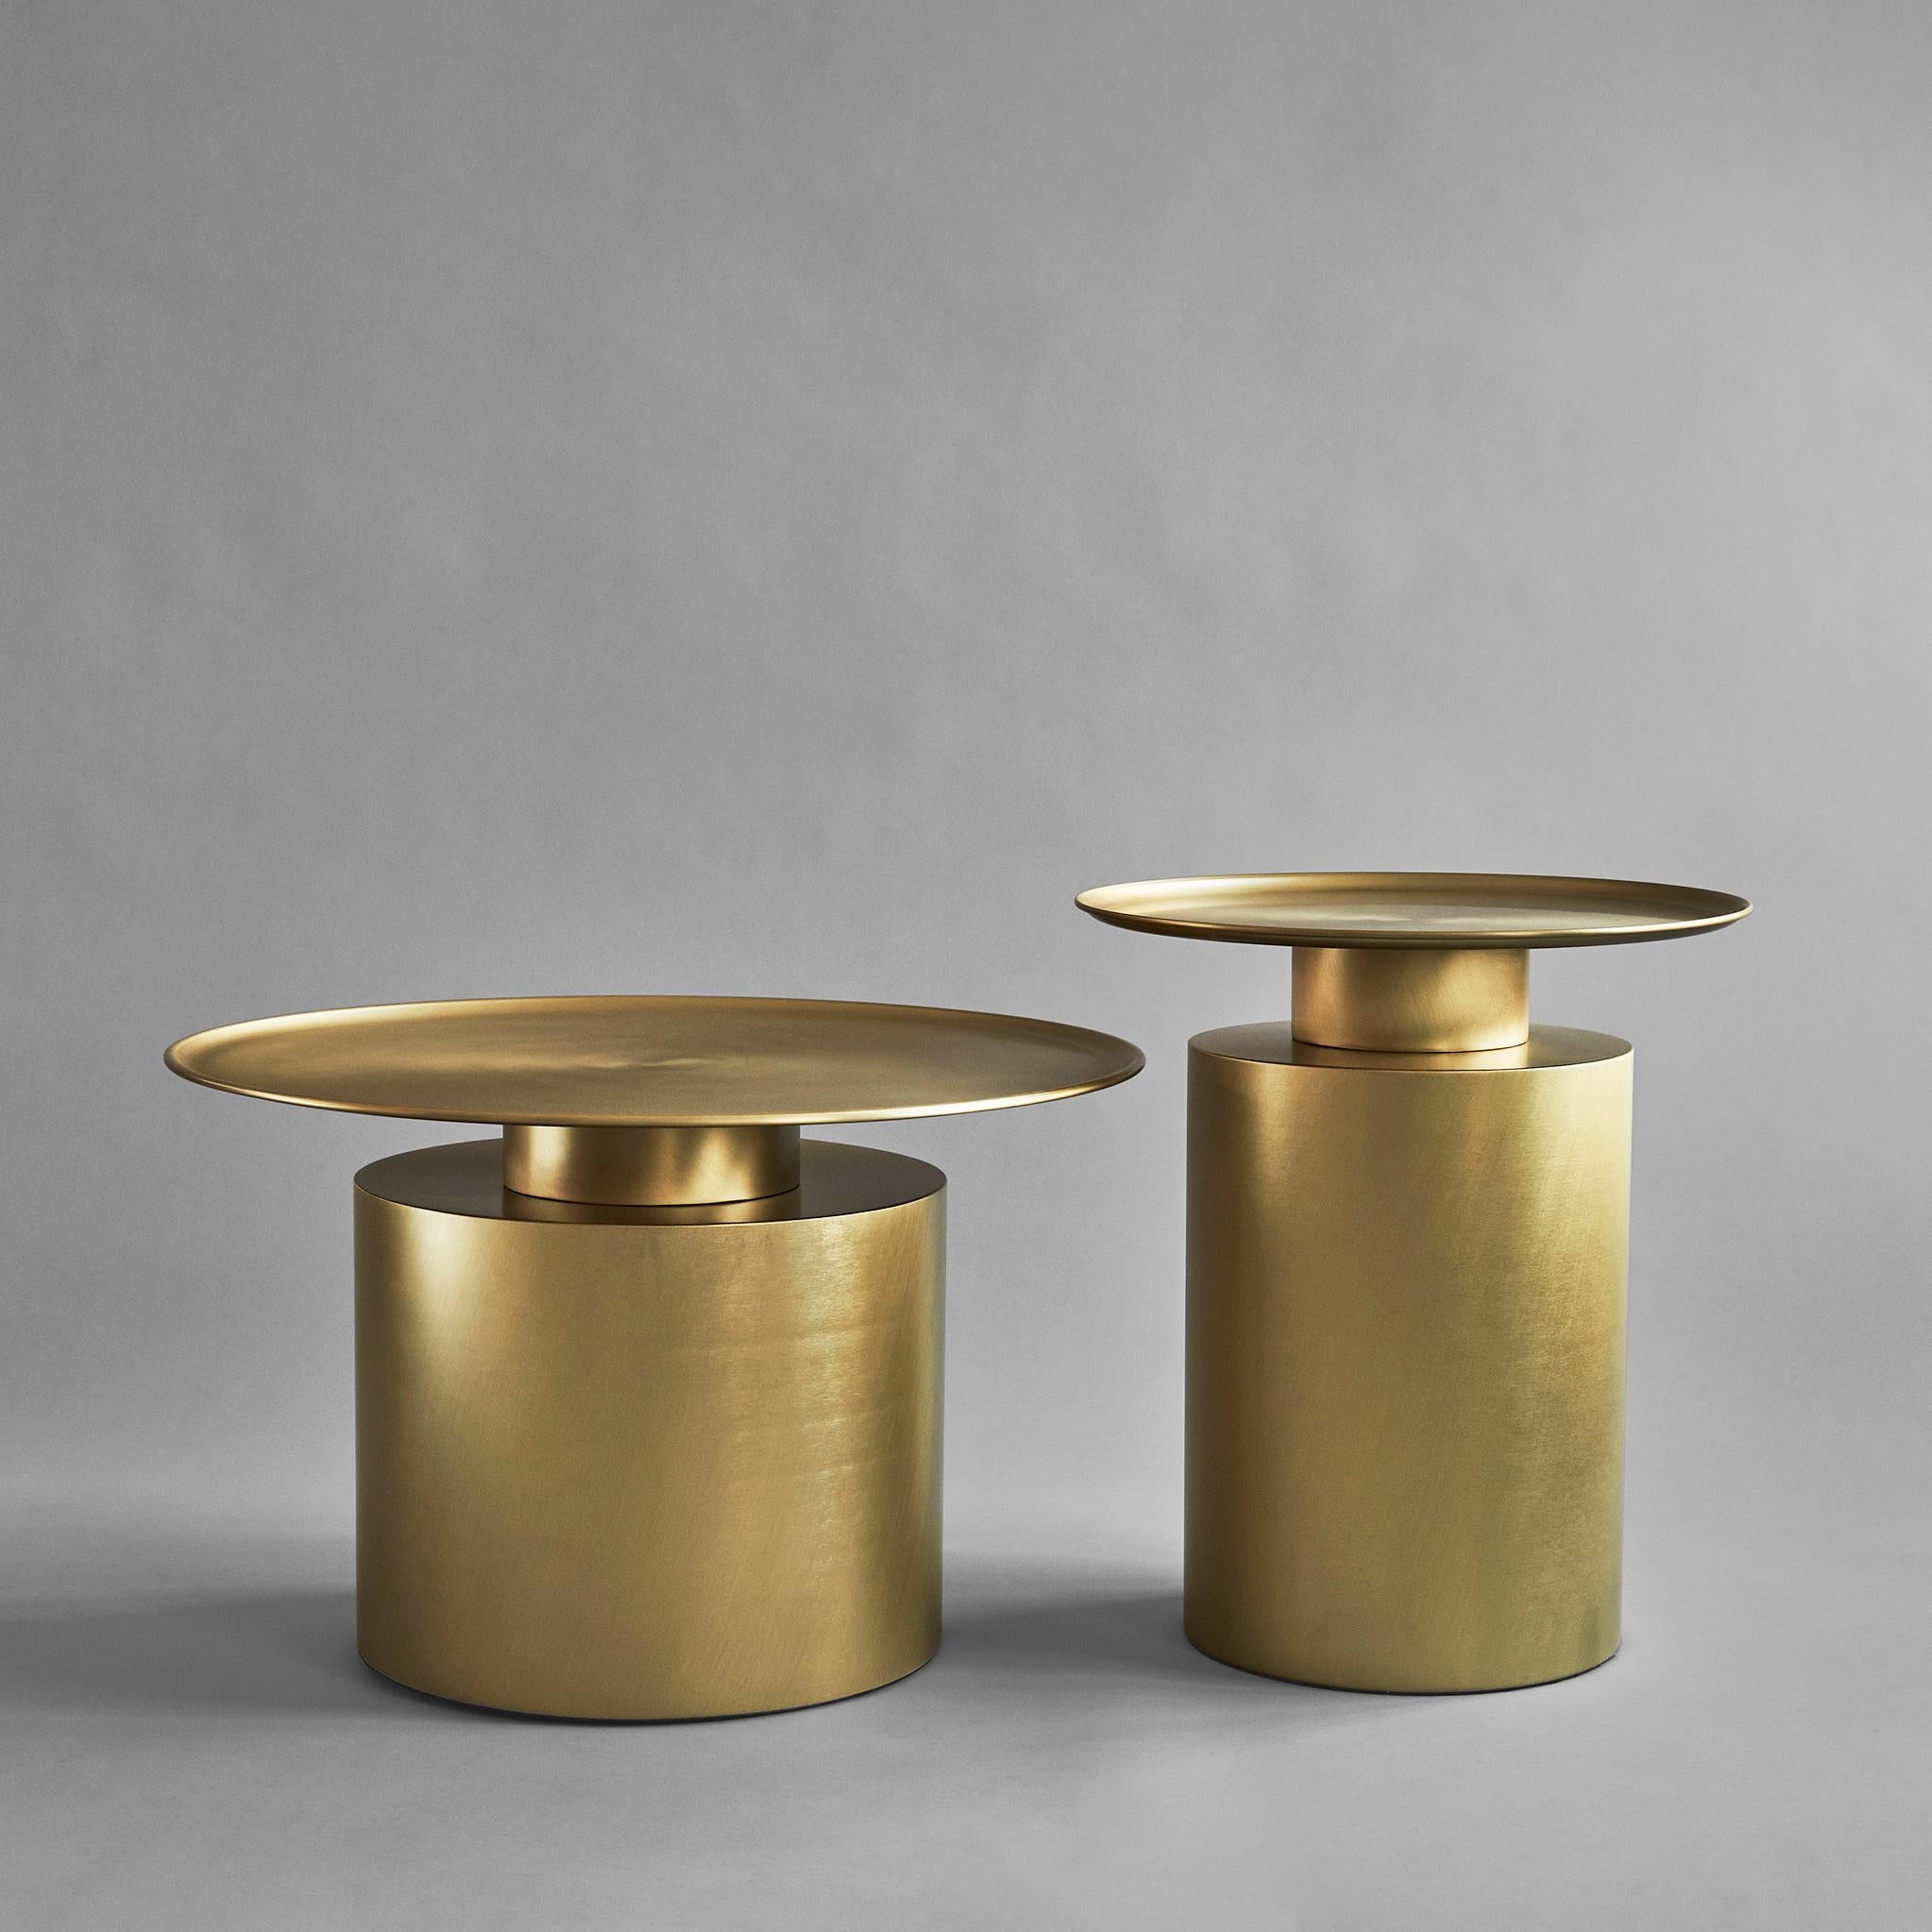 Brass pillar table low by 101 Copenhagen
Designed by Kristian Sofus Hansen & Tommy Hyldahl
Dimensions: L65 / W65 /H41 cm
Materials: plated metal

Pillar is inspired by the rich lustrous use of material in the 1930´s Art Deco movement. The coffee